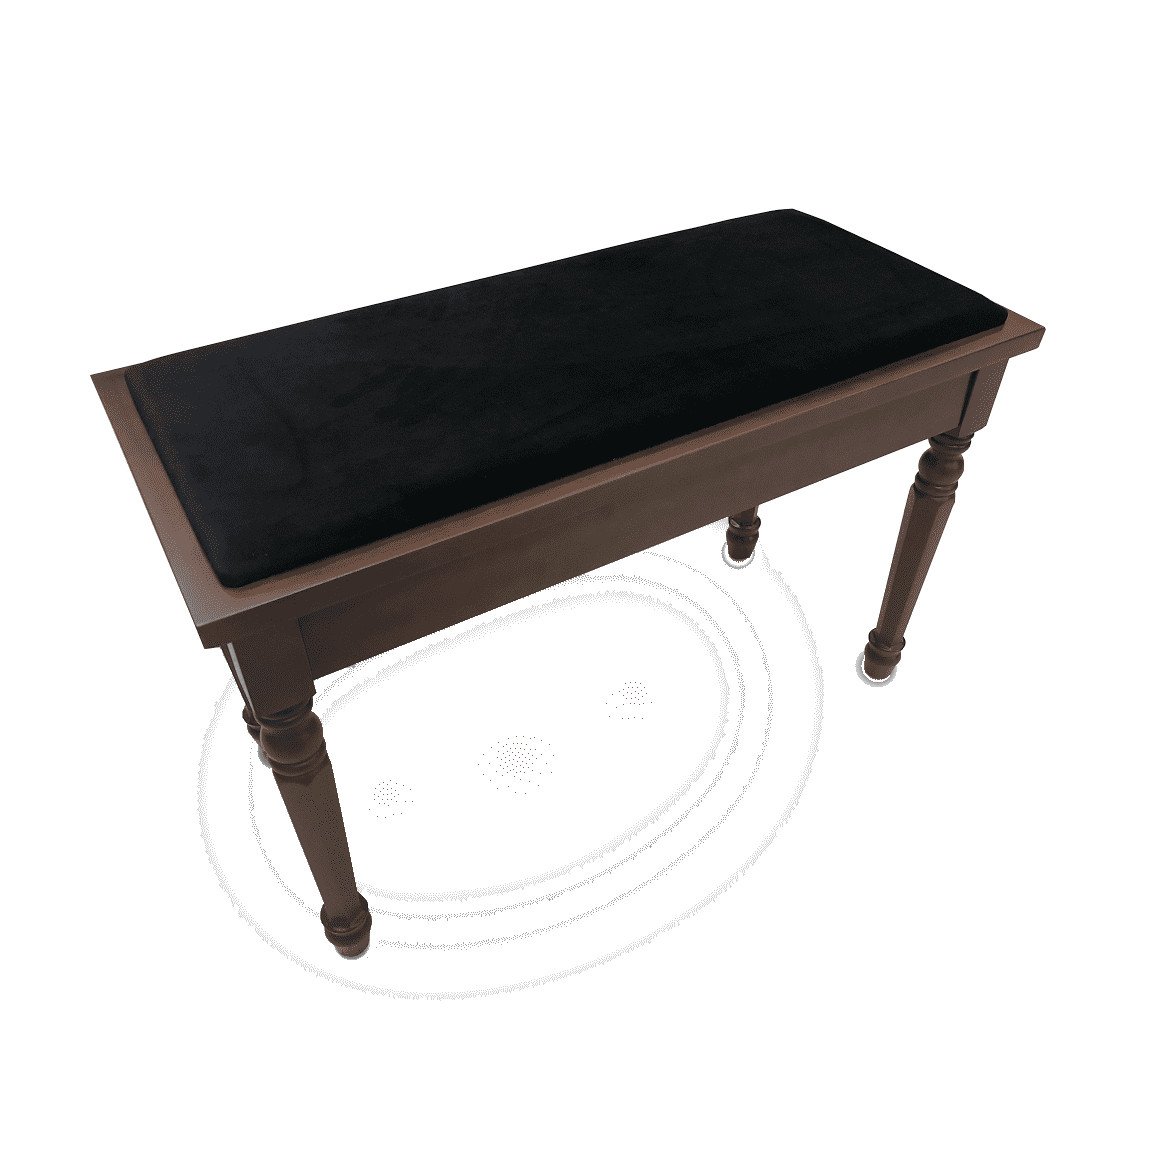 Frederick Walnut Duet Piano Bench - Padded Top w/ Traditional Legs